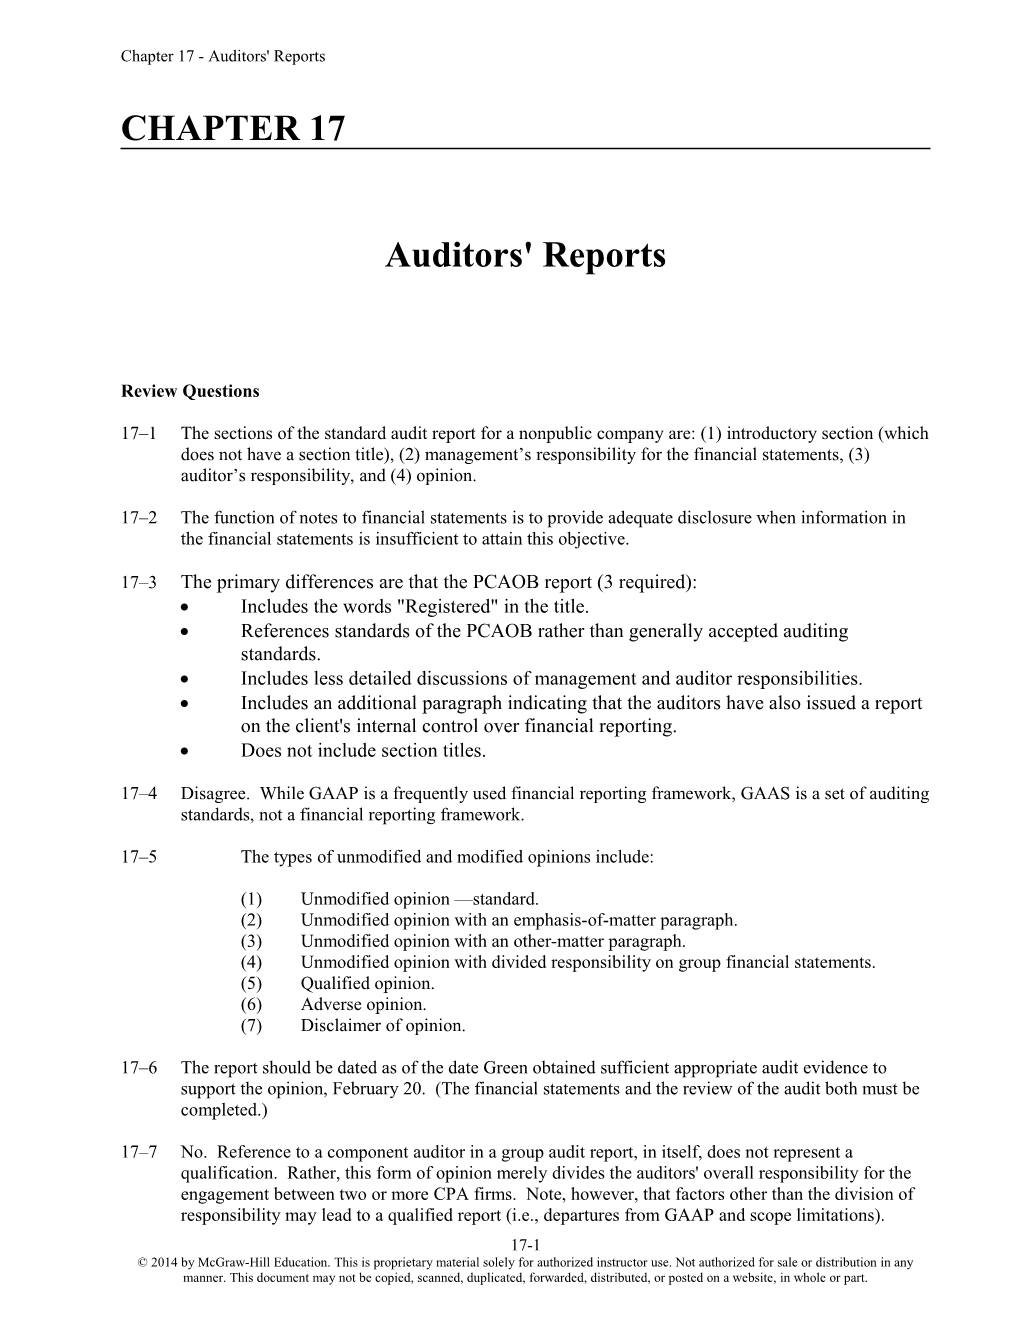 Chapter 17 - Auditors' Reports